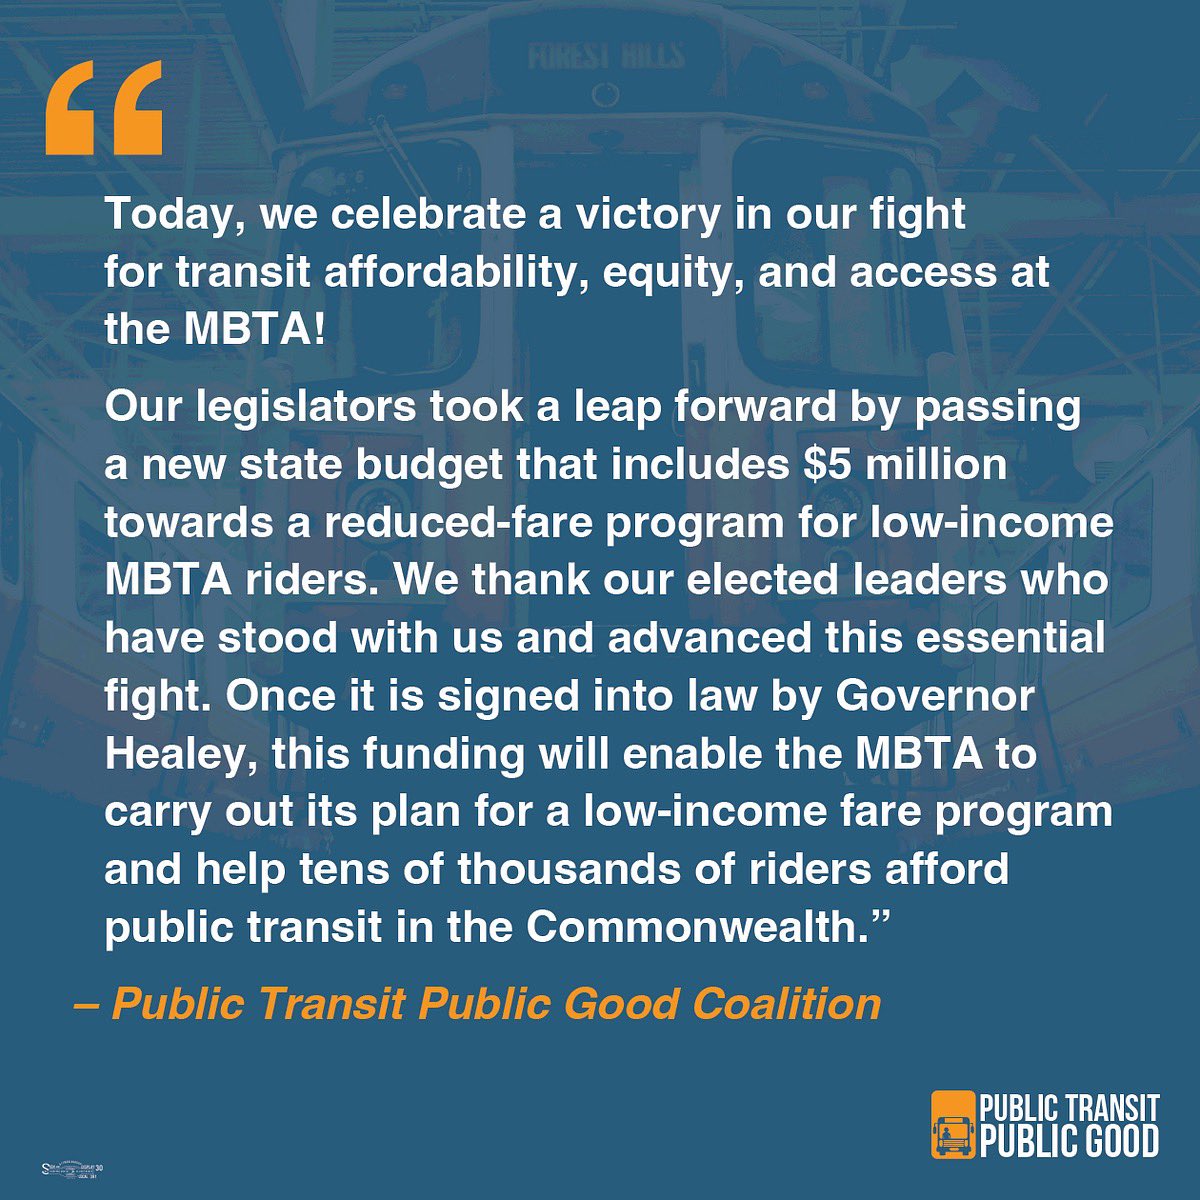 🎉The MA legislature passed the #StateBudget that includes $5M for a low-income fare program! We thank them for their commitment to affordability and equity at the MBTA.

🚉 Next stop: Gov. Healey signs the budget into law, allowing the MBTA to implement an #LIF program!